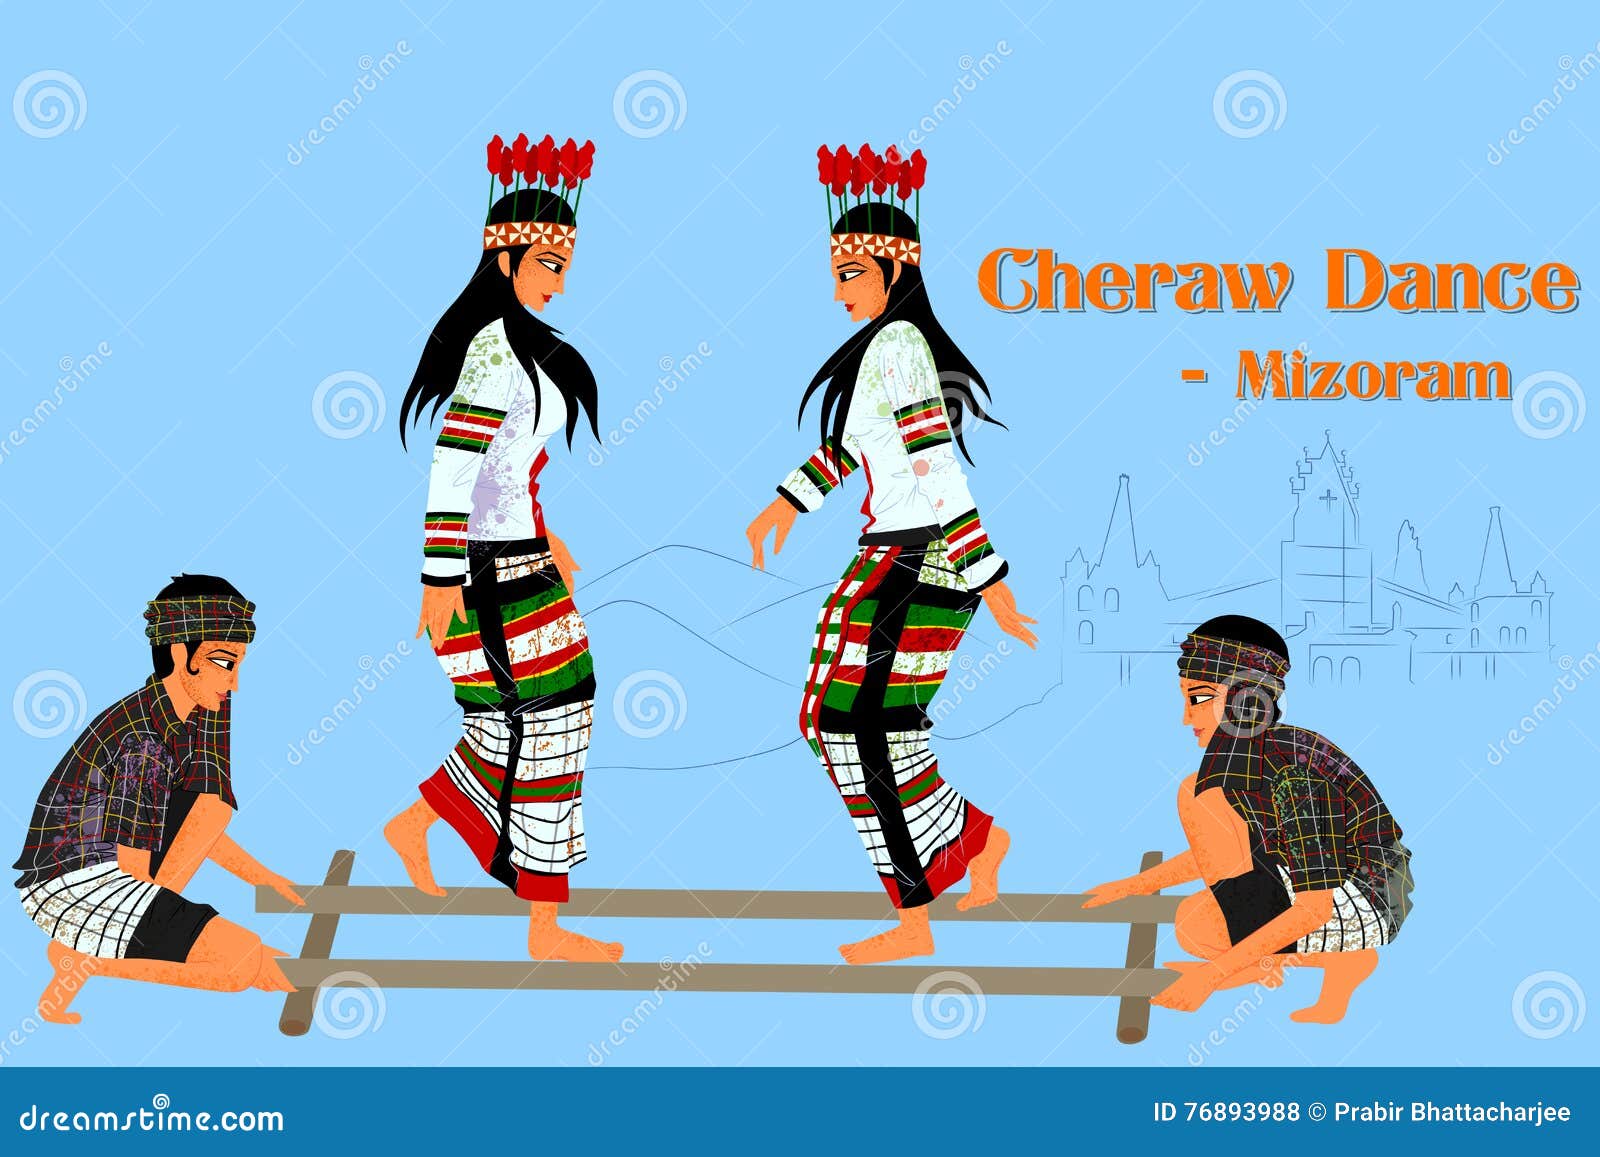 Mizoram Cartoons, Illustrations & Vector Stock Images - 324 Pictures to